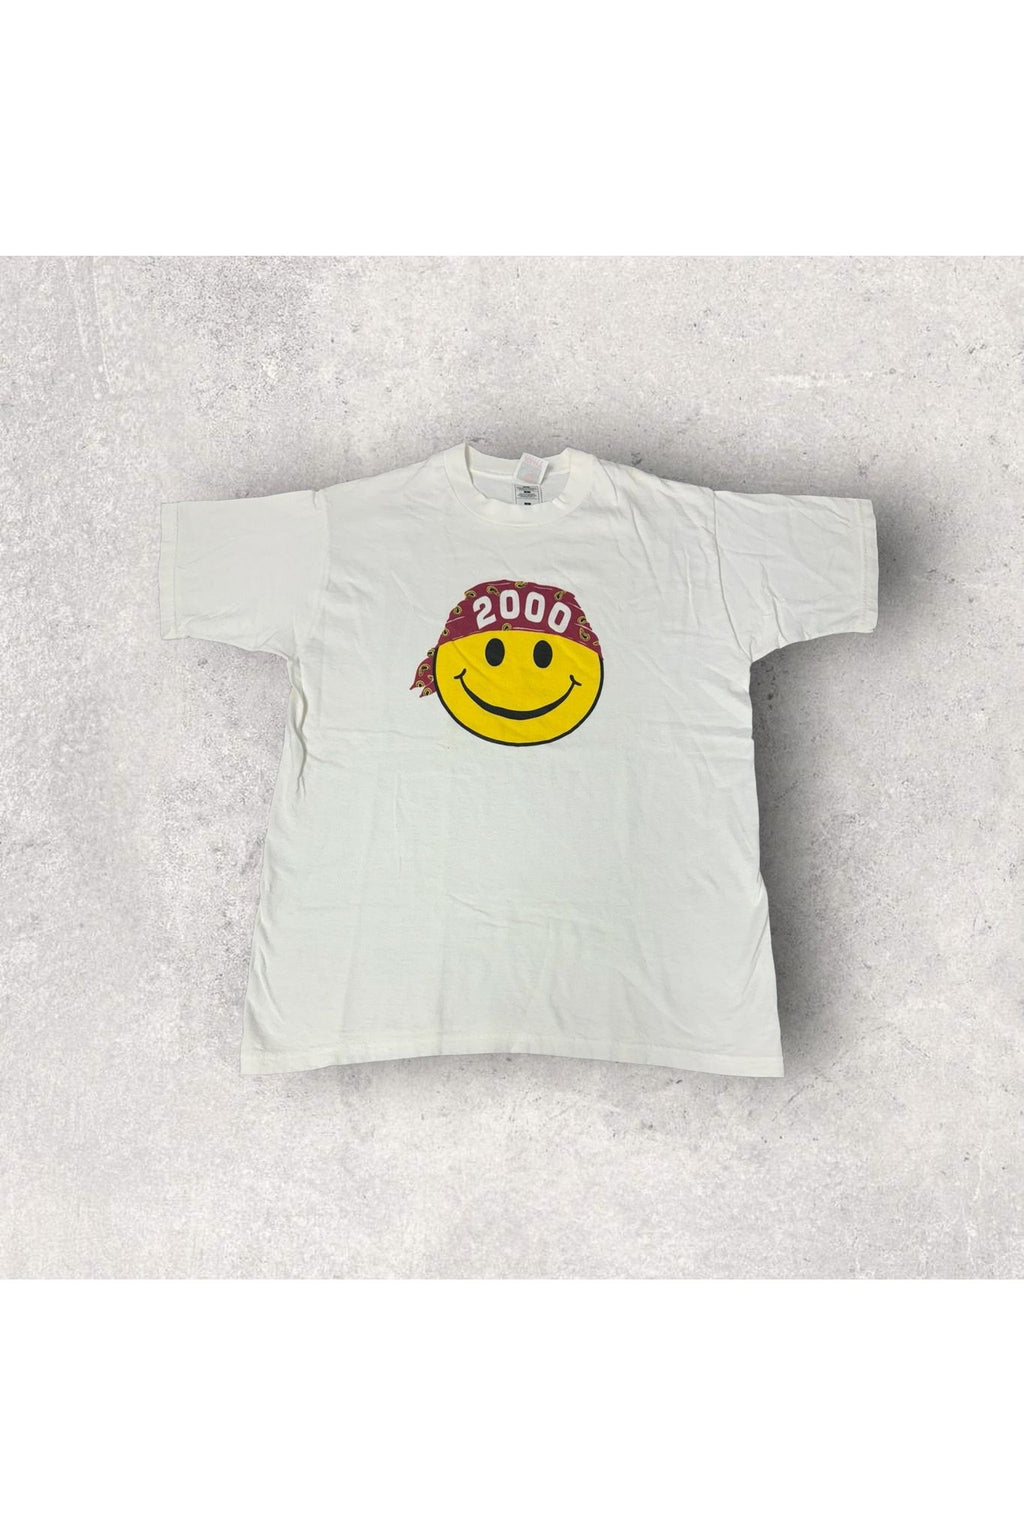 Vintage 2000 Smiley Face Tee- L